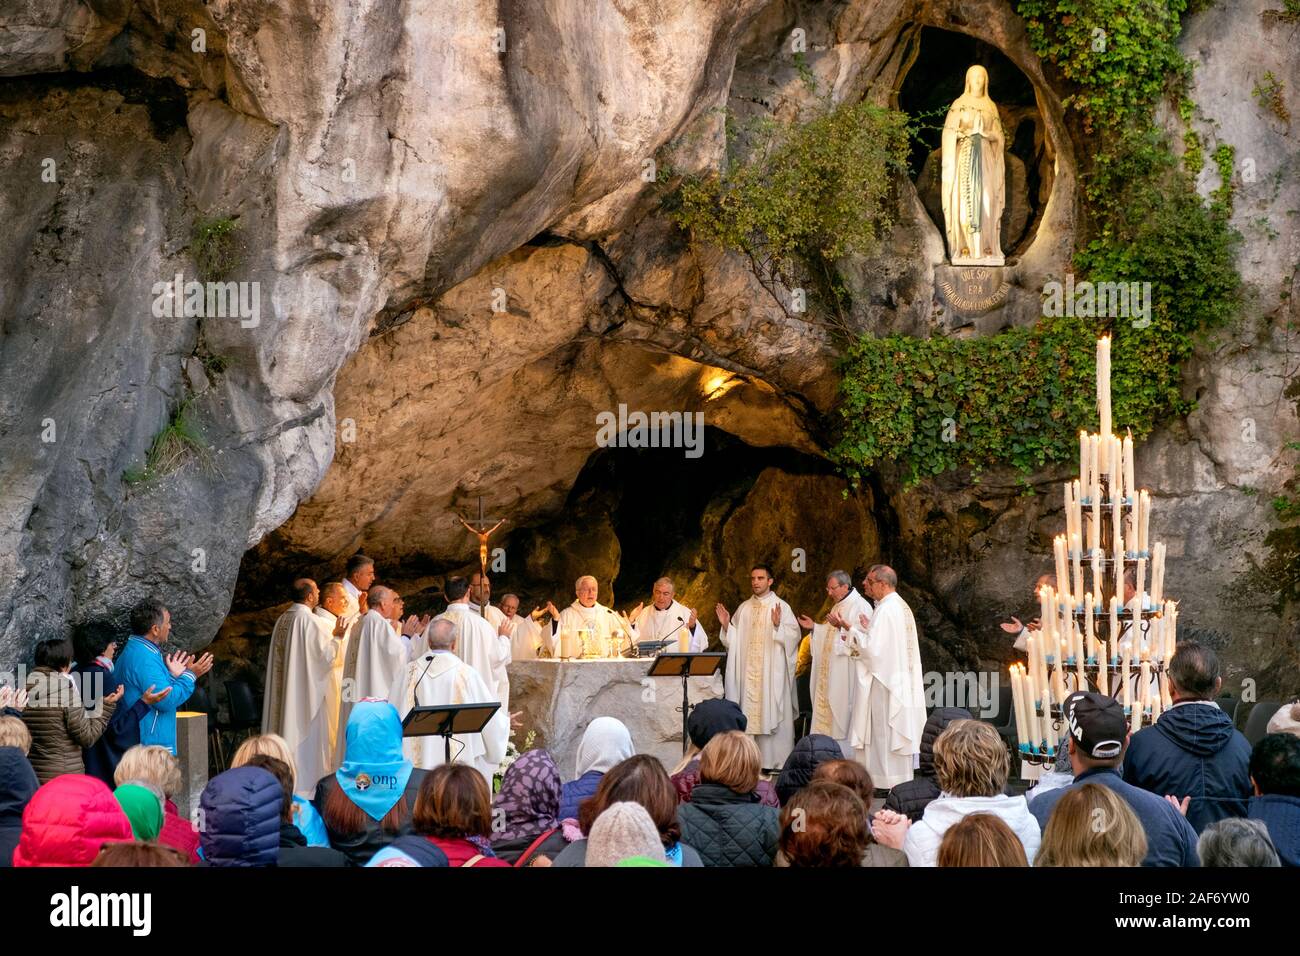 Praying at a morning mass or service, Grotte de Massabielle / Grotto of Massabielle, Sanctuary of Our Lady of Lourdes, Lourdes, Pyrenees, France Stock Photo